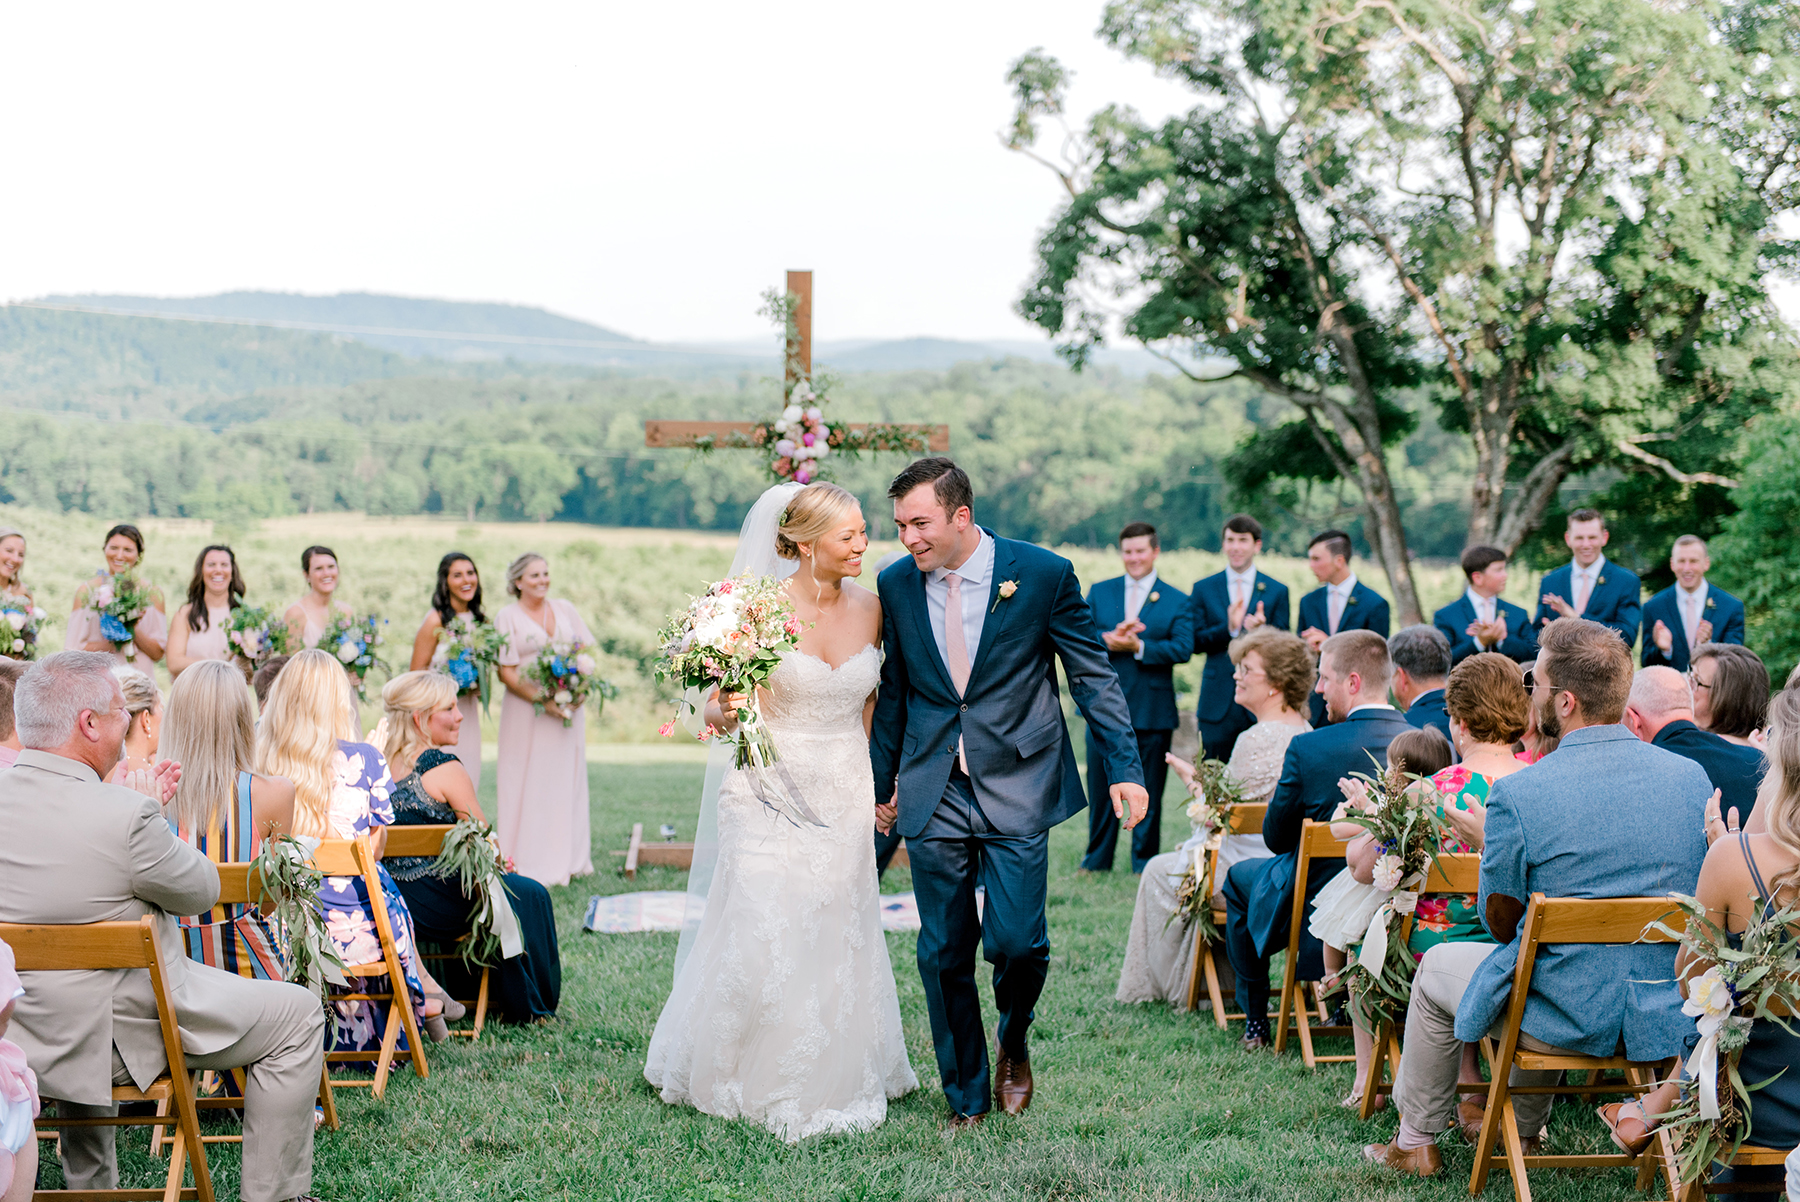 A Sweet Summertime Wedding In The Blue Ridge Mountains Kathryn Ivy Photography16